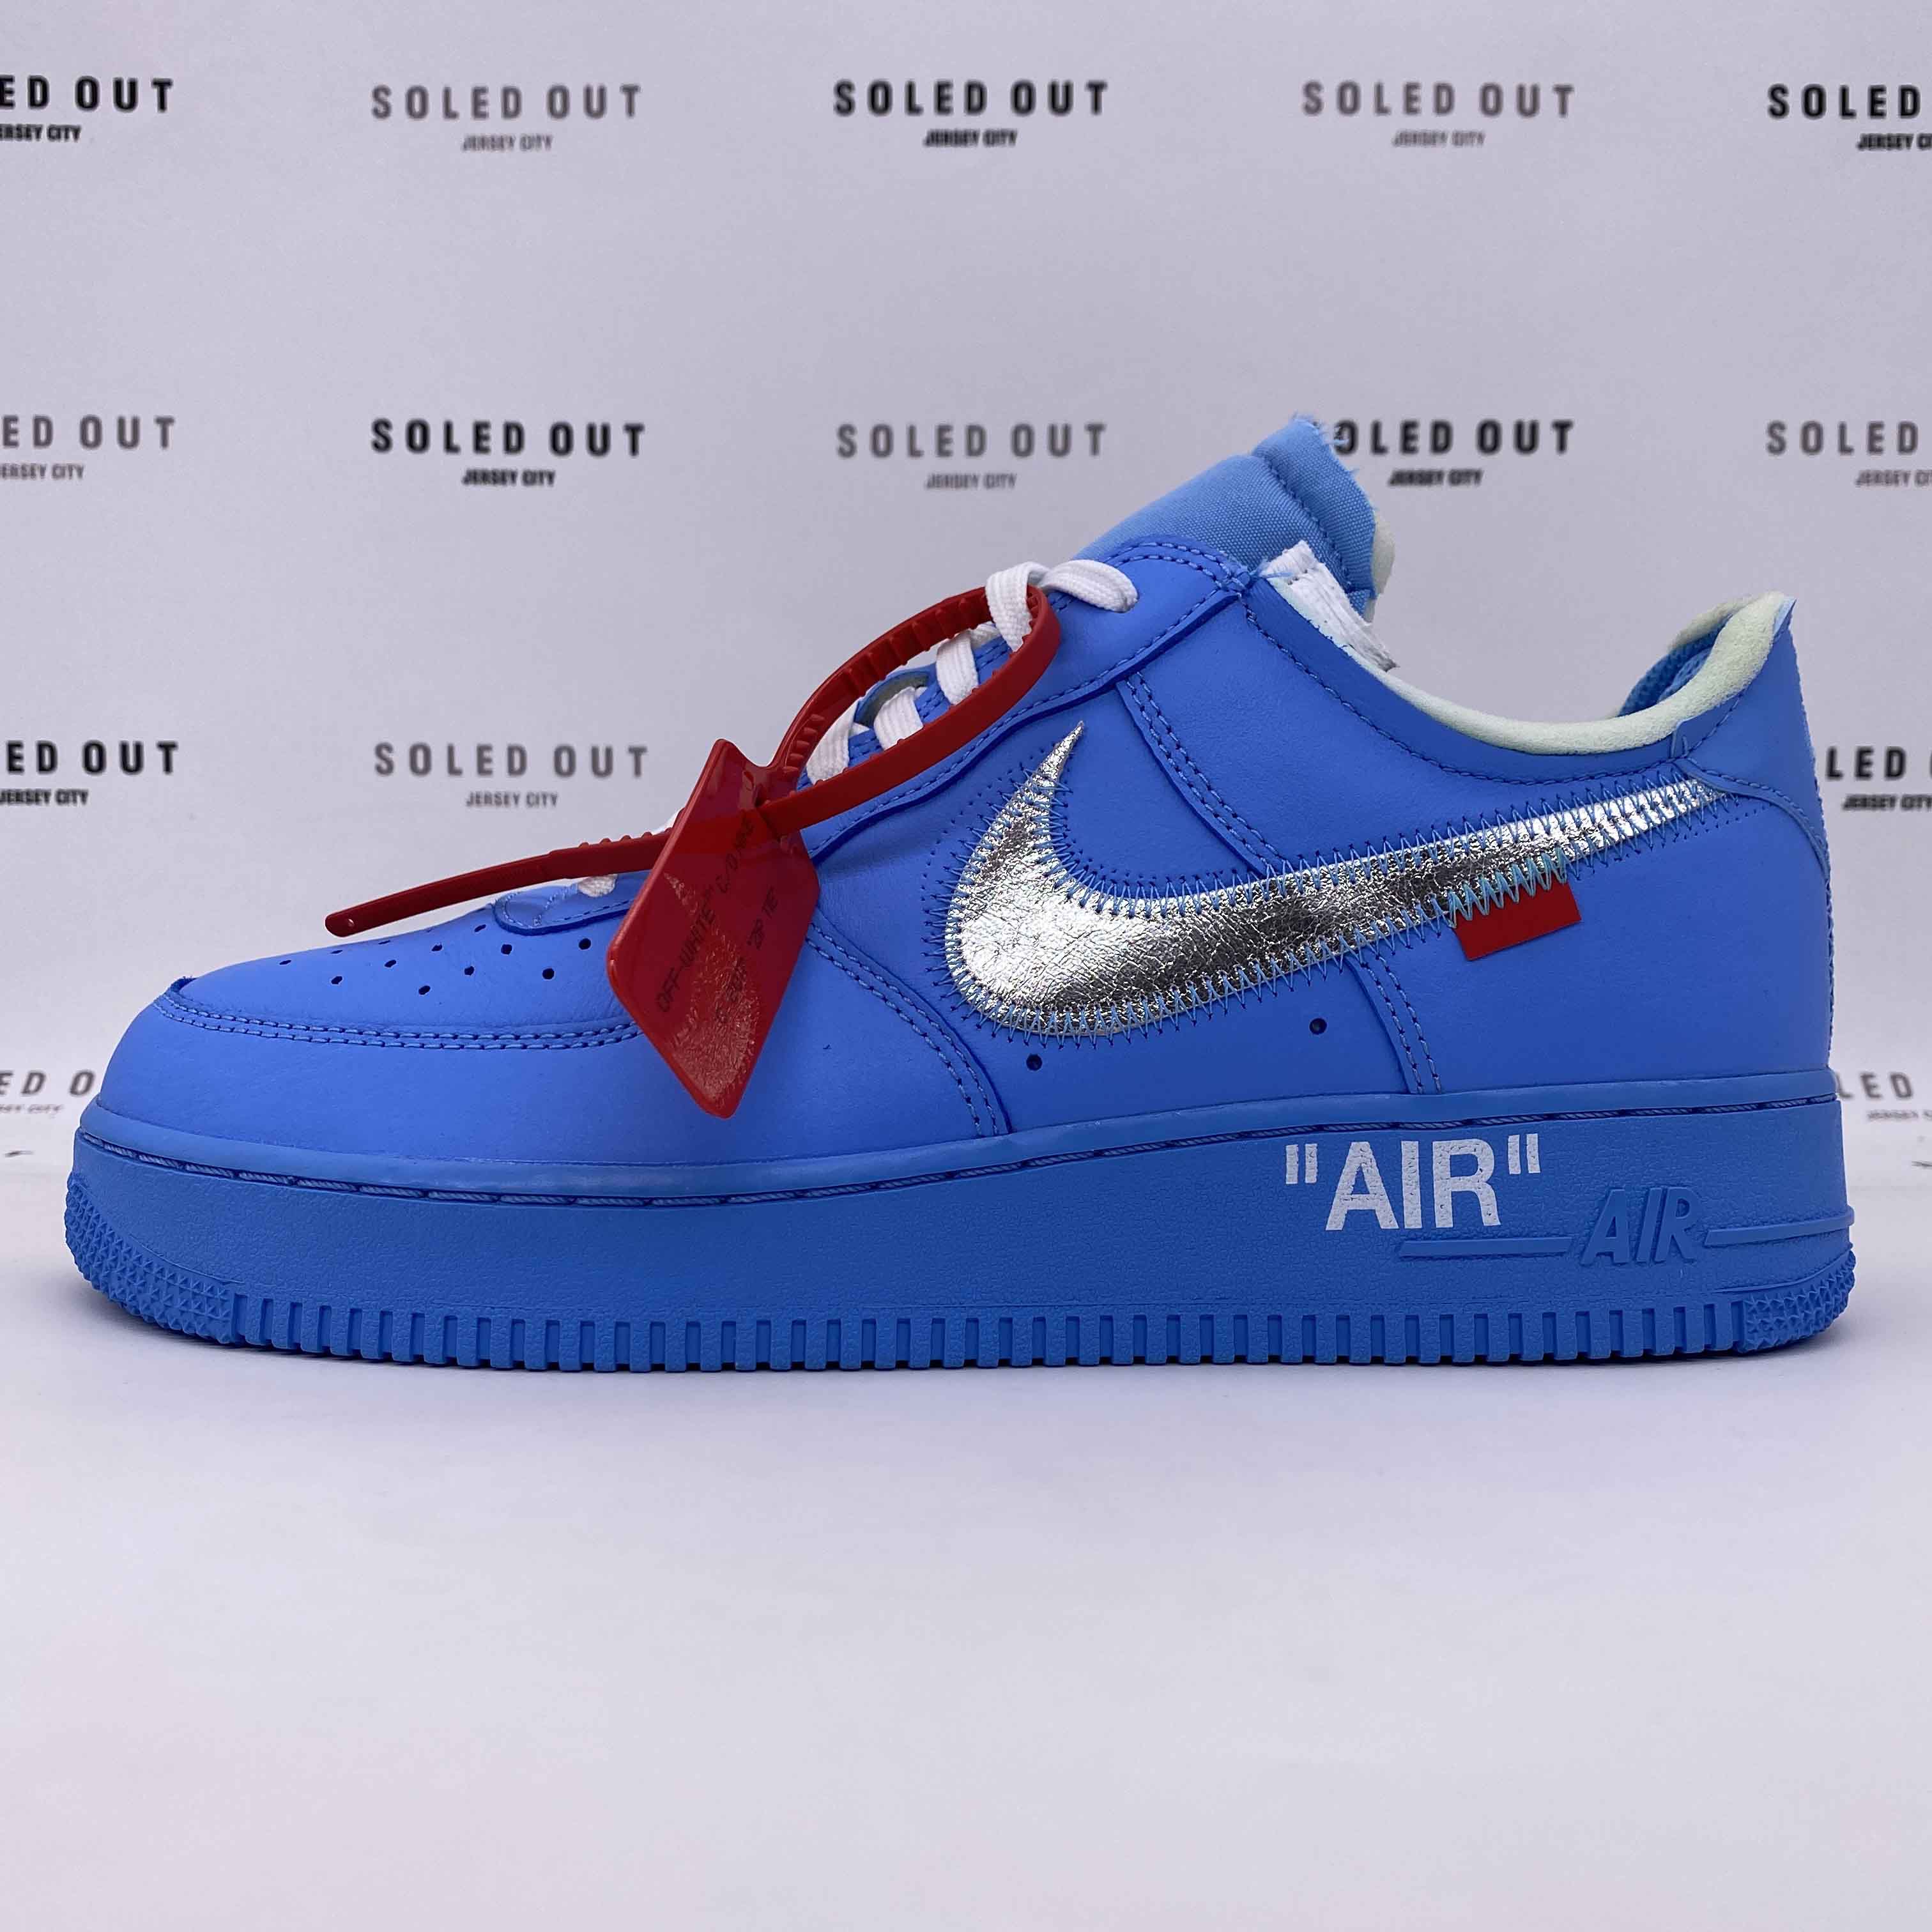 Nike Air Force 1 Low "Mca" 2019 New (Cond) Size 10.5